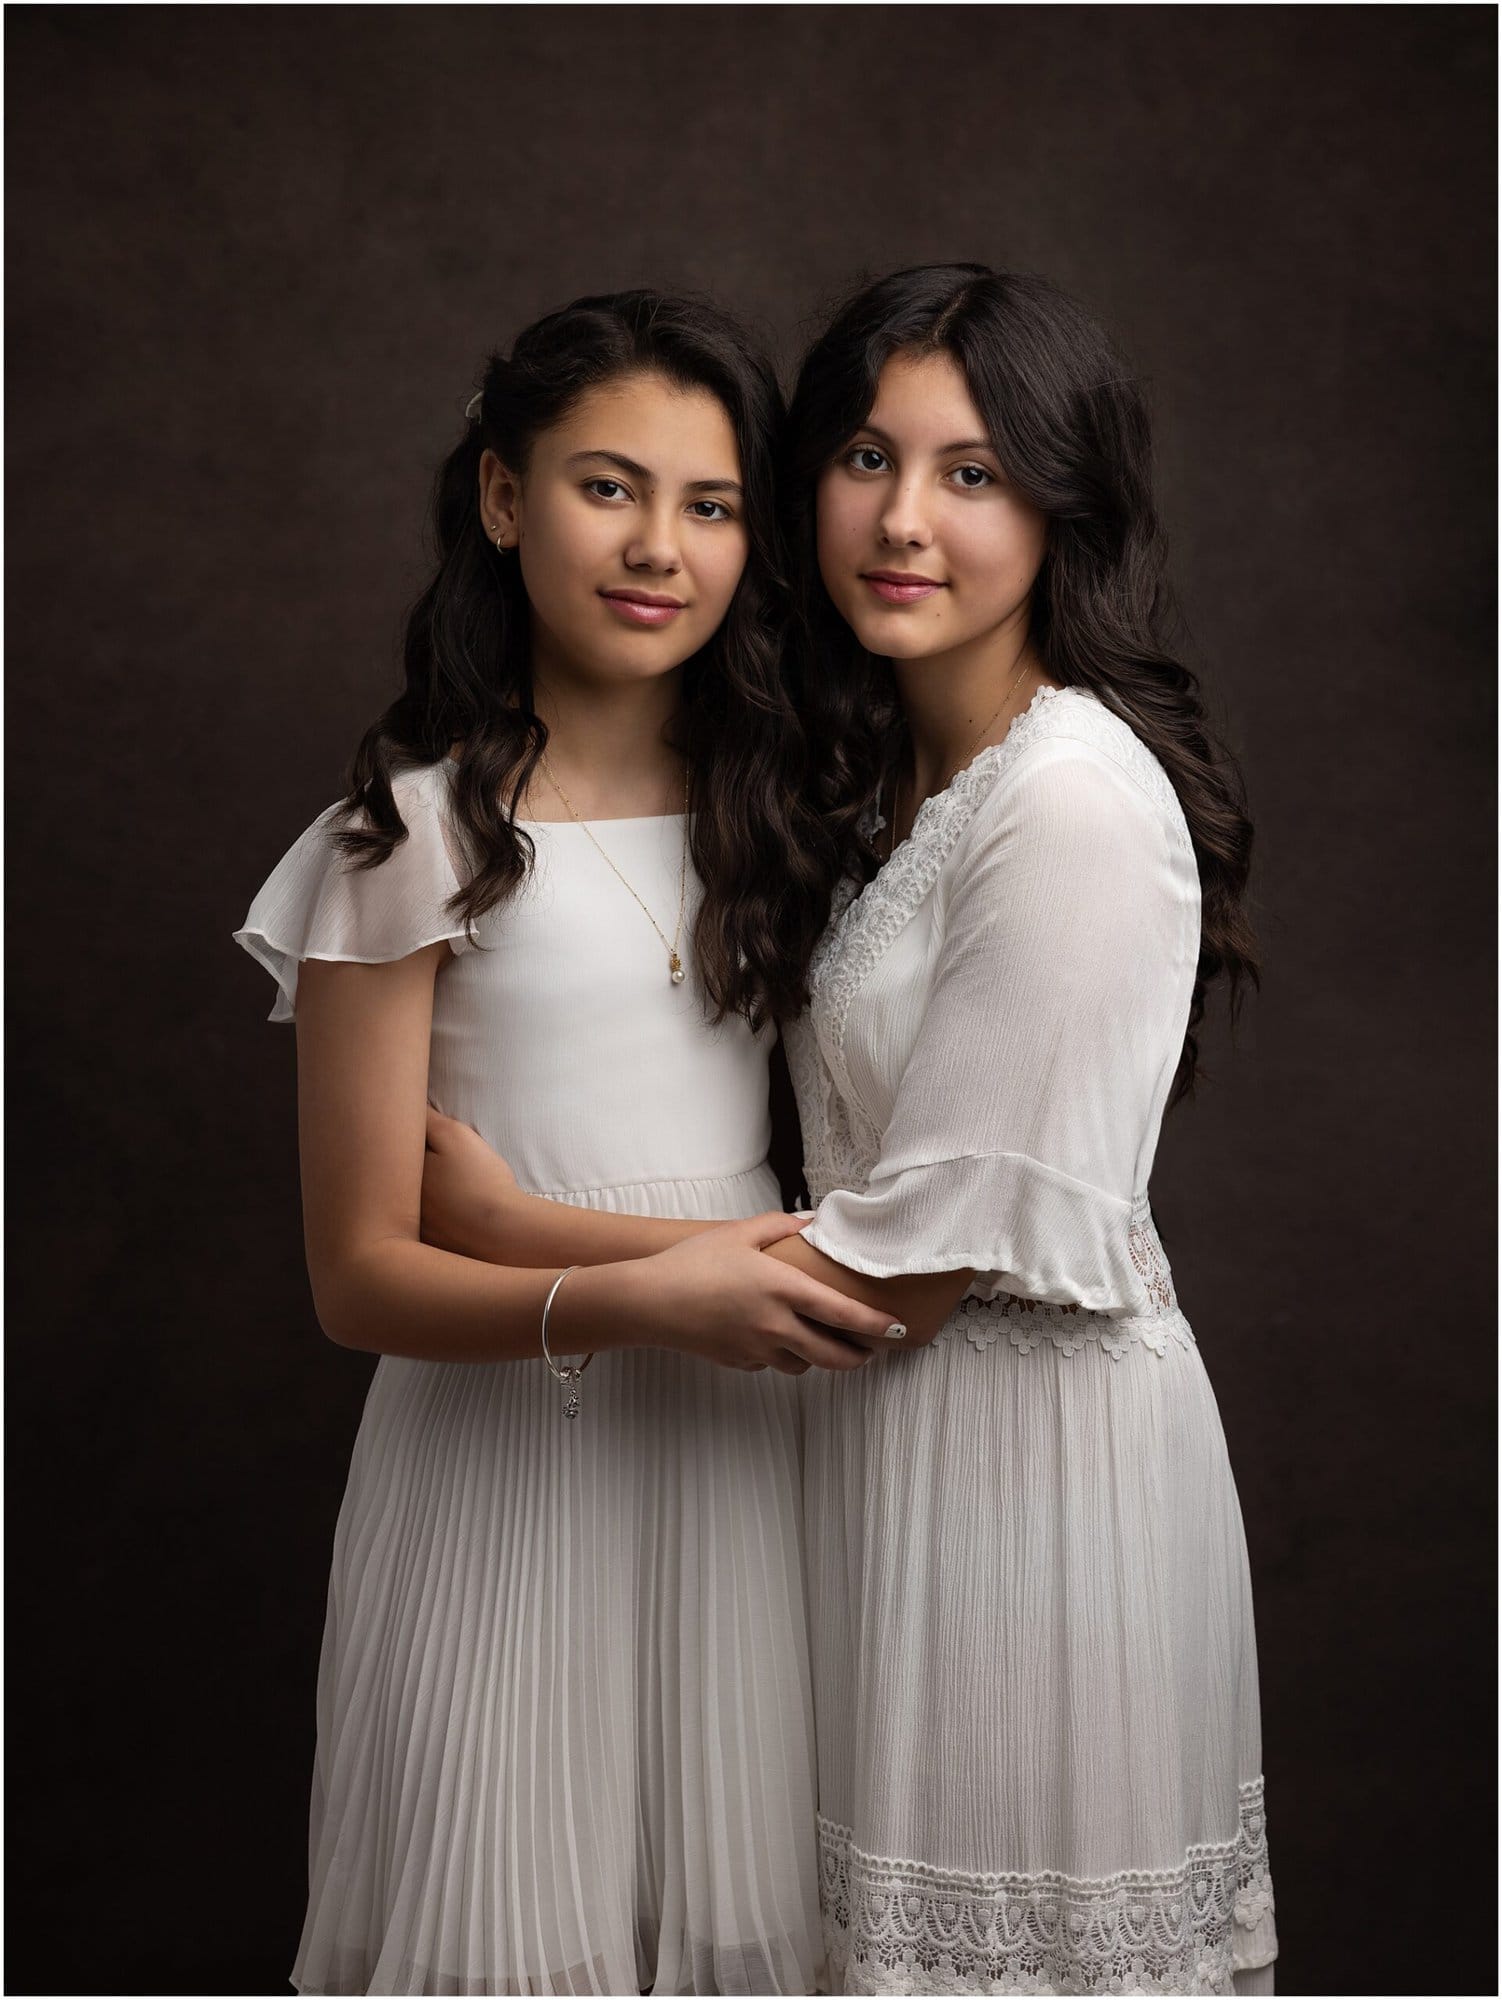 Two Sisters embrace during a Family Photoshoot at the studio of Alison McKenny, Suffolk Portrait Photographer